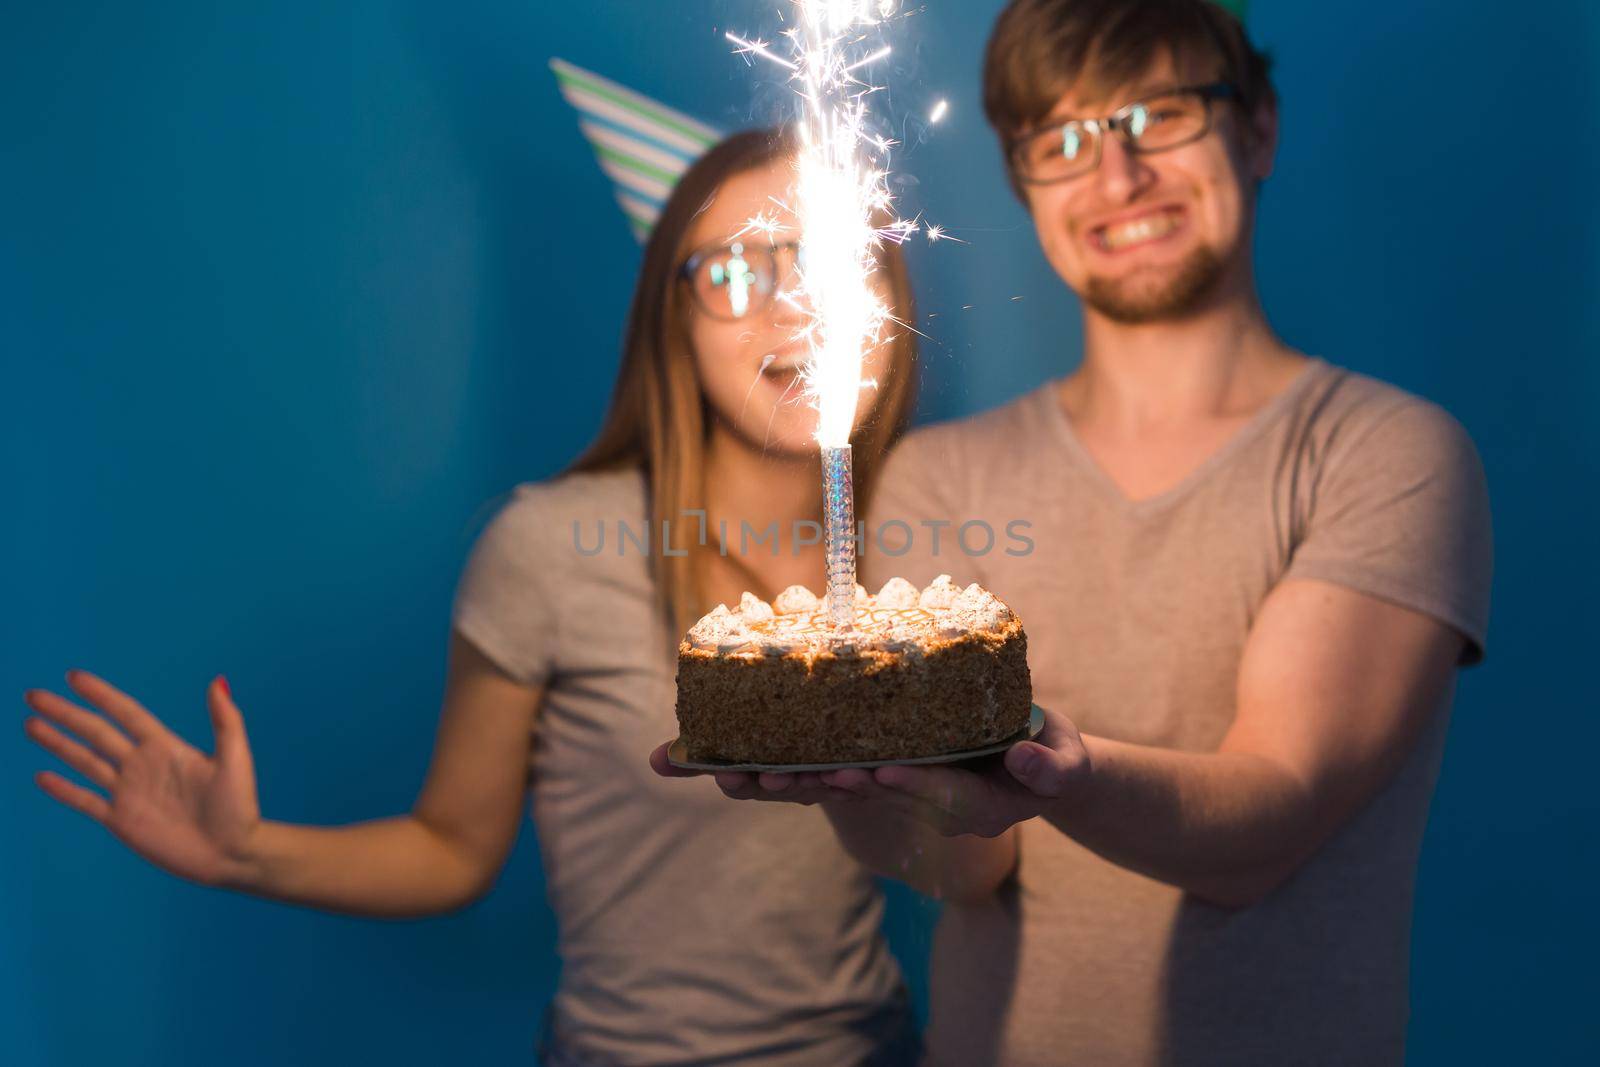 Funny young couple in paper caps and with a cake make a foolish face and wish happy birthday while standing against a blue background. Concept of congratulations and fooling around